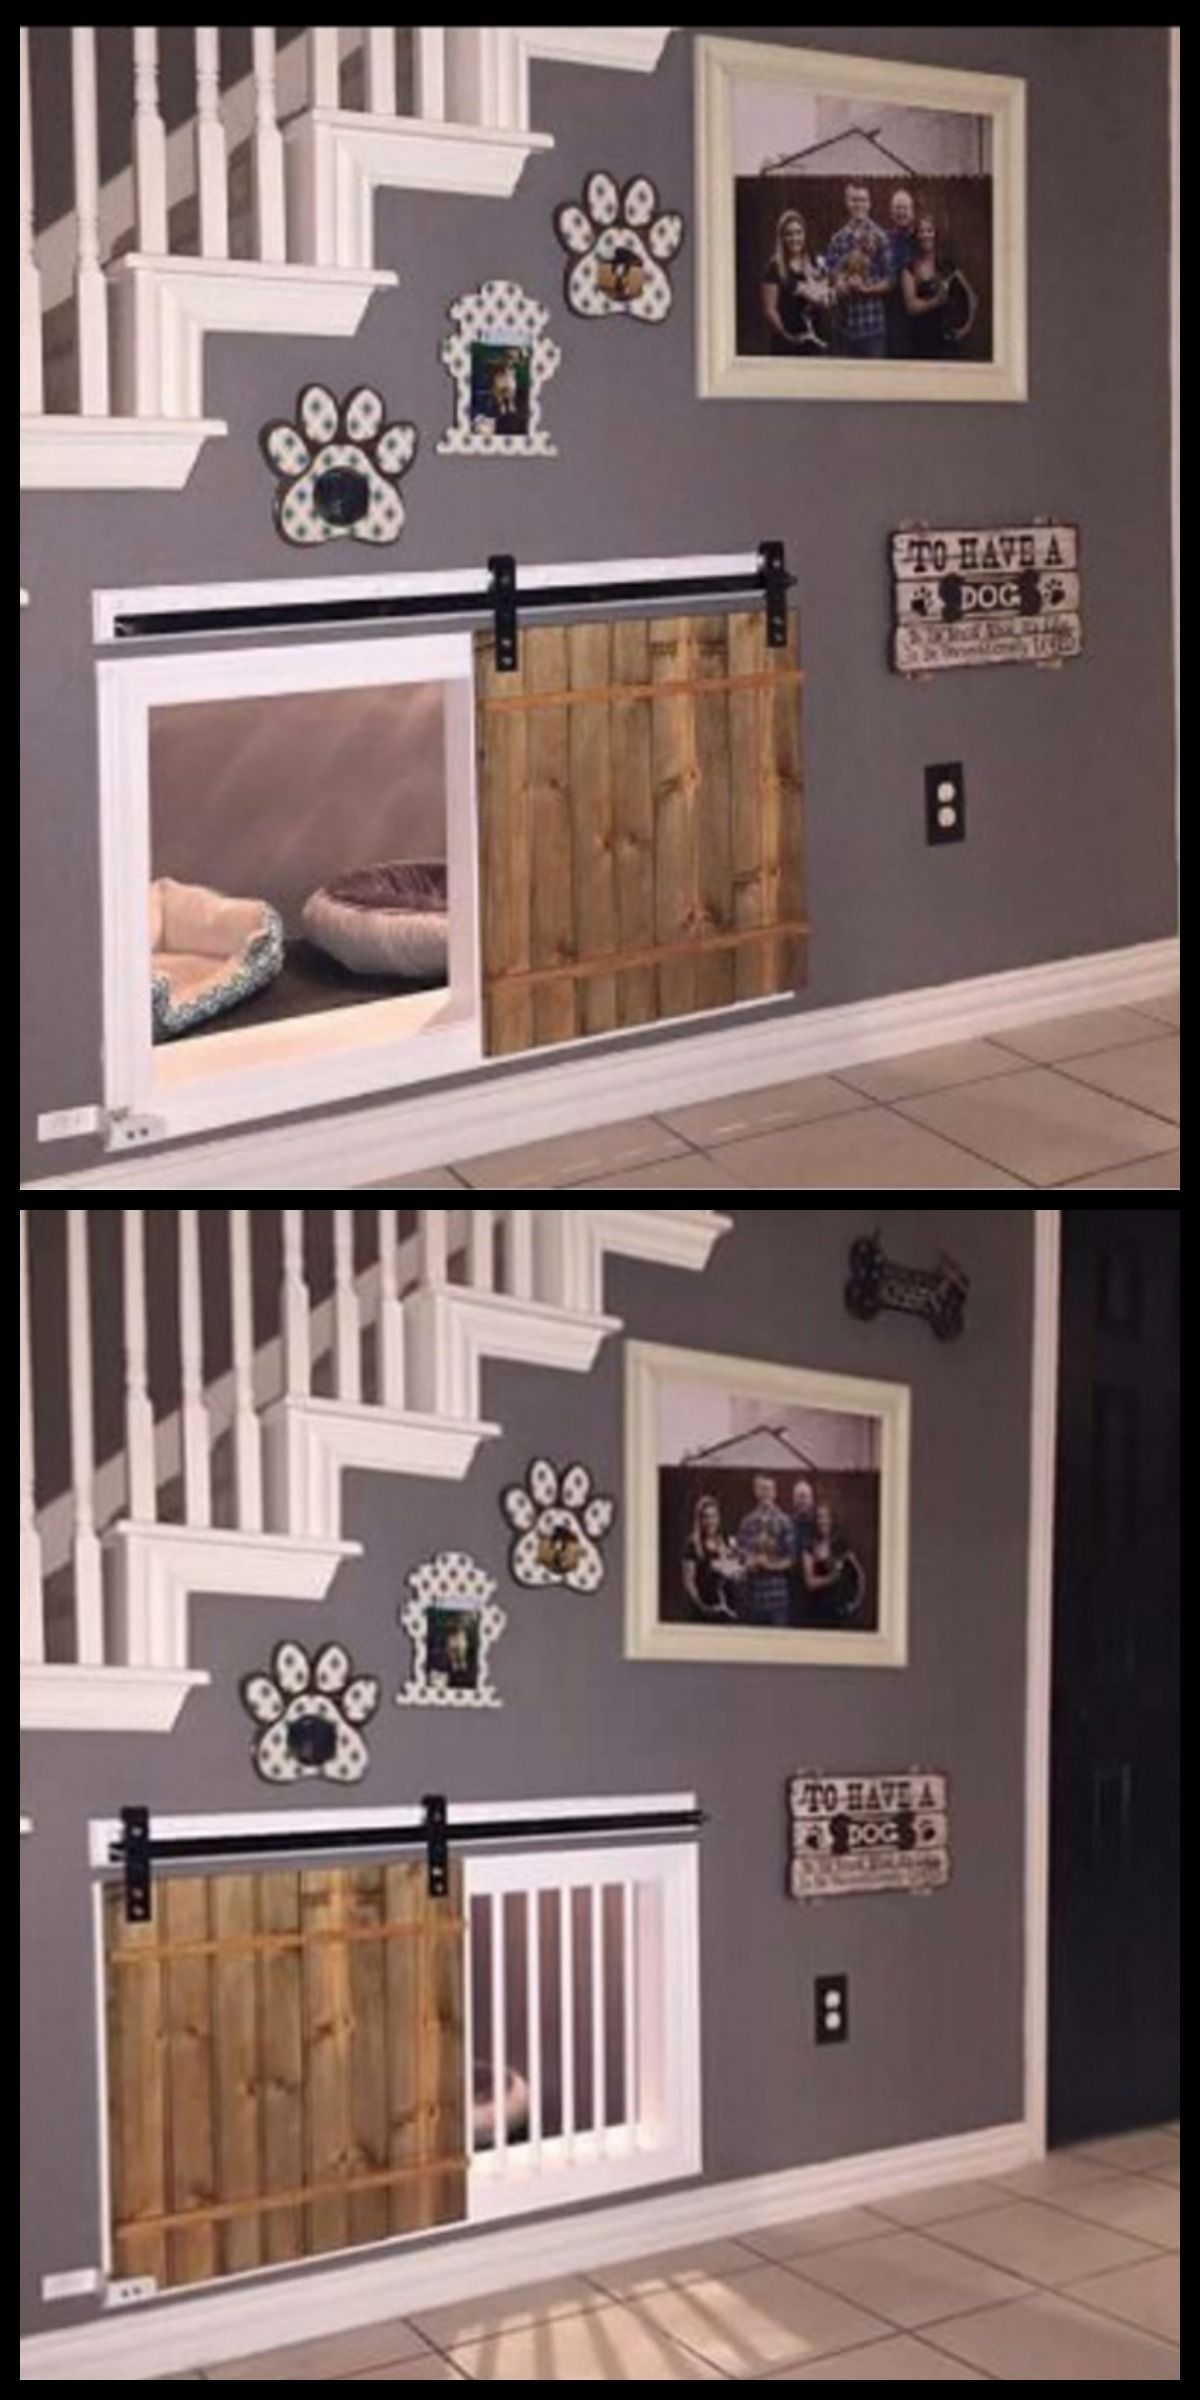 Awesome dog kennel under the stairs design idea. If you want an indoor dog house, utilizing the space under the stairs for a cozy,